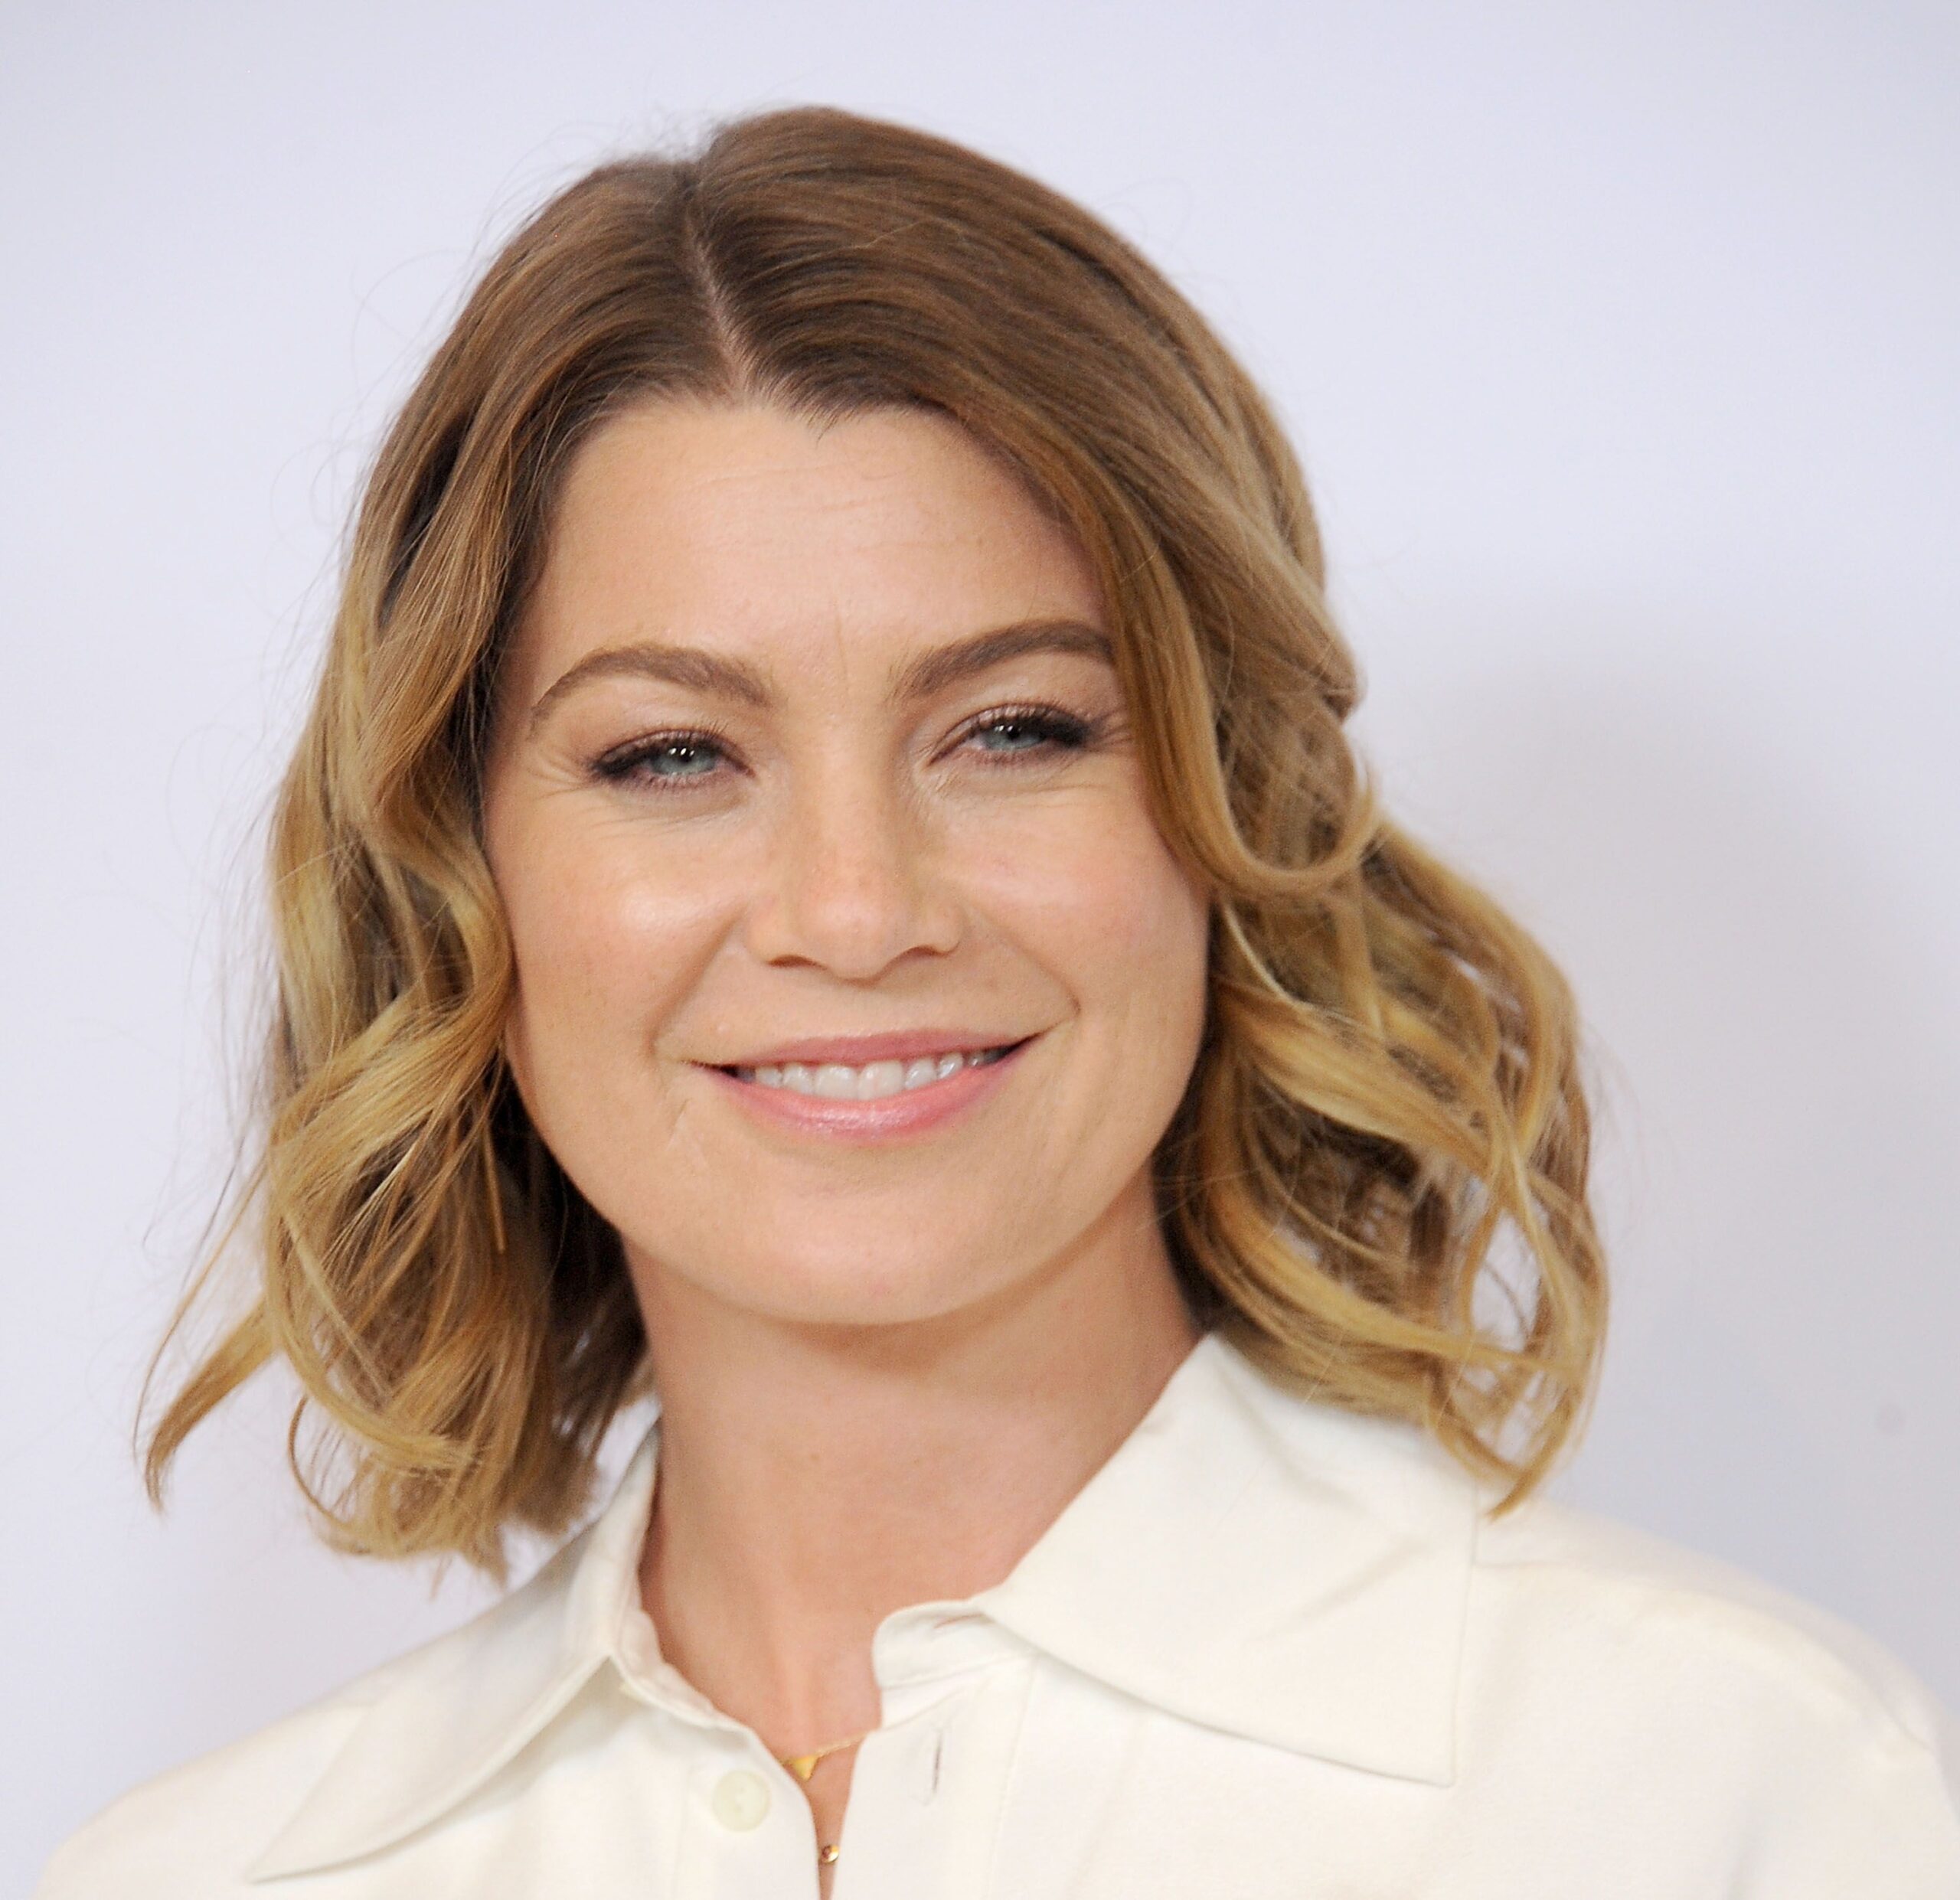 Grey Anatomy Cast: Is Actress Meredith AKA Ellen Pompeo Leaving The Show? Family And Net Worth Explored